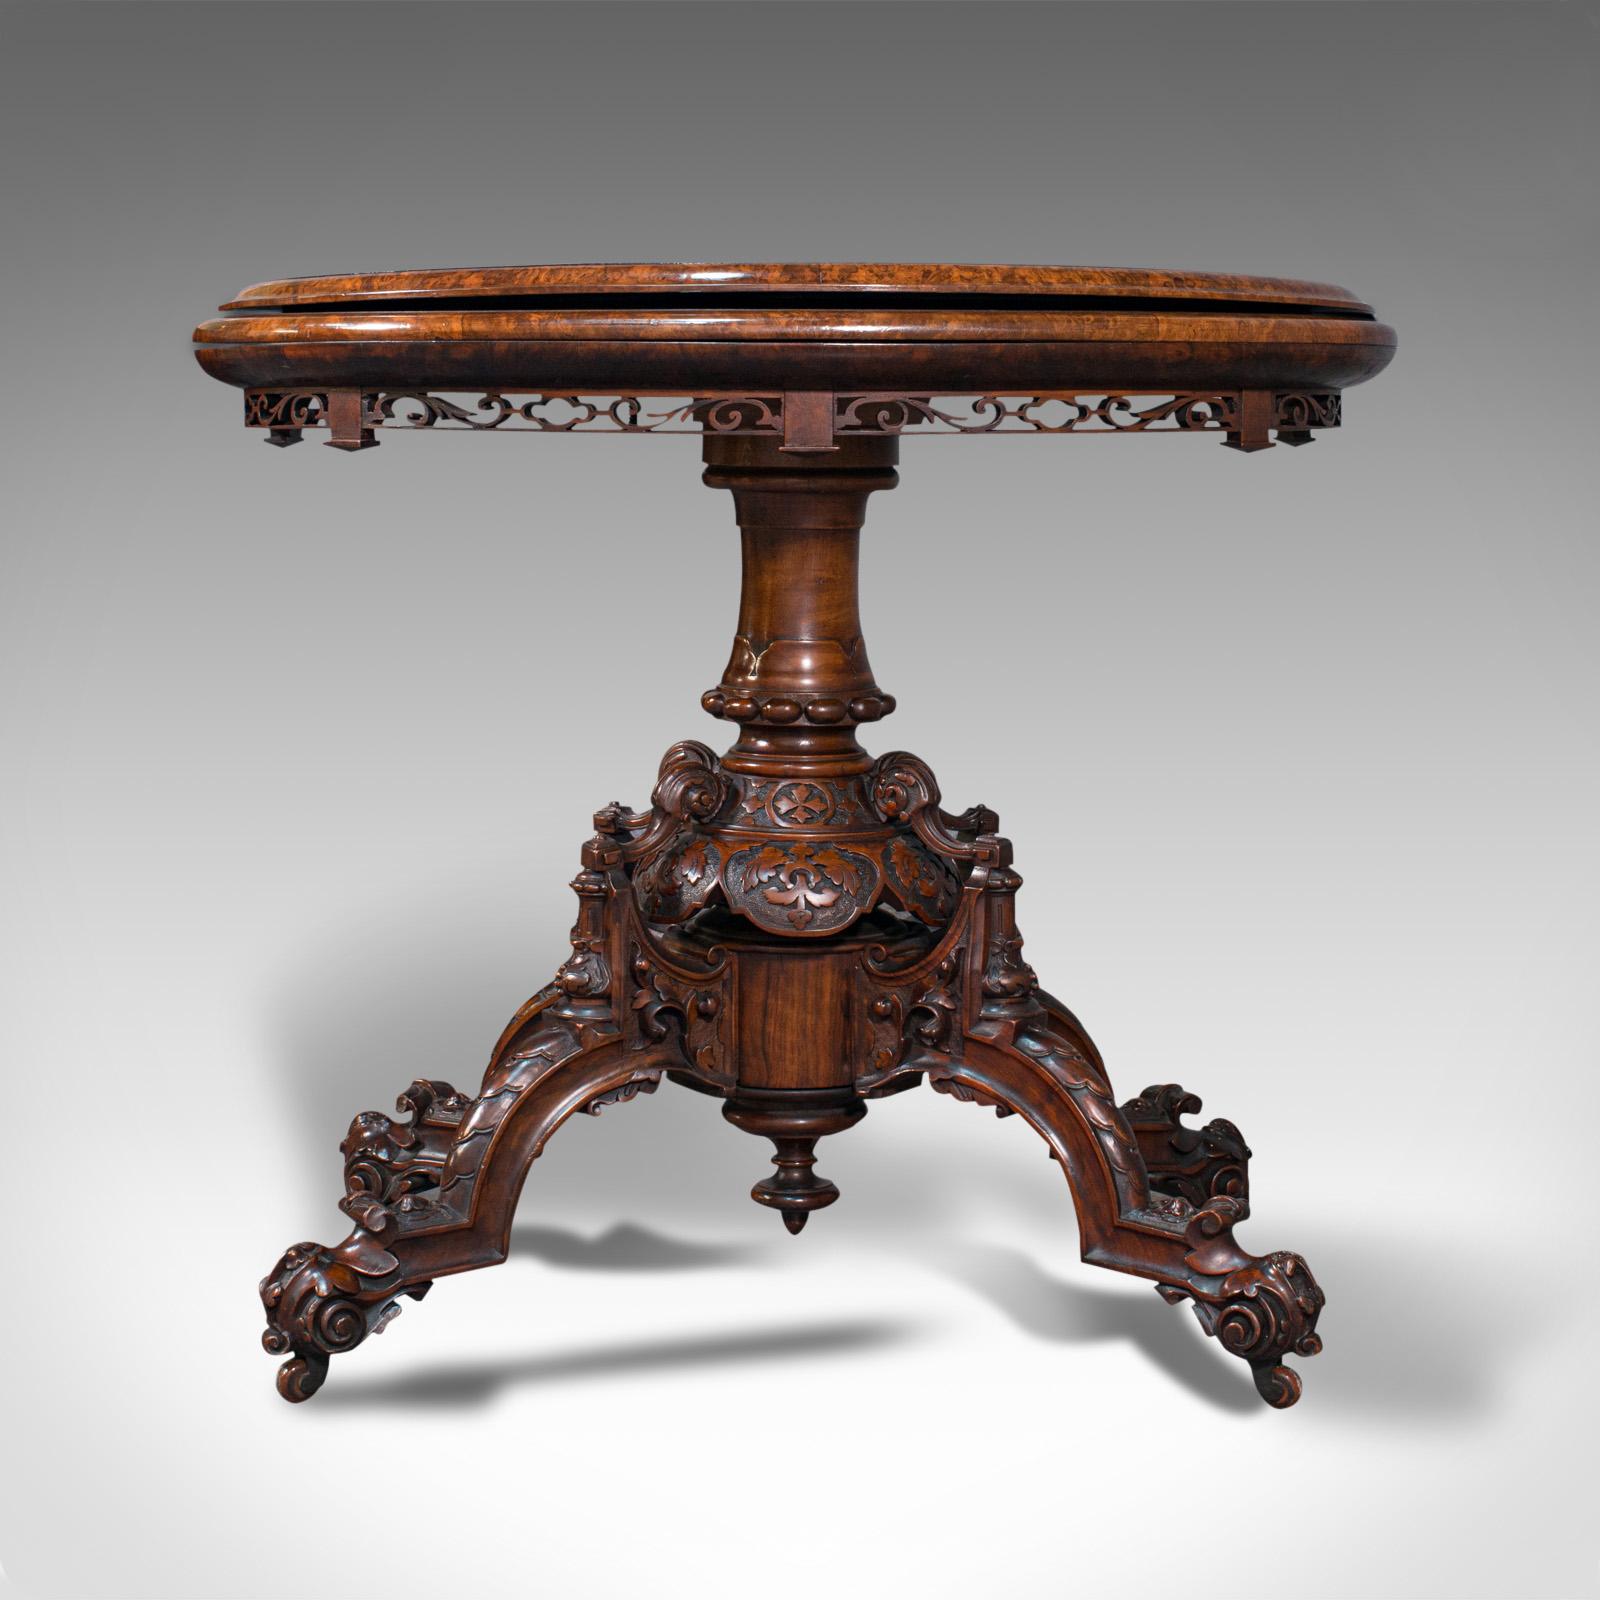 This is a striking antique card table. An English, book-matched walnut and boxwood inlay folding bridge games table, dating to the Victorian period, circa 1870.

Beautiful Victorian craftsmanship for the finest gentleman's lounge
Displaying a